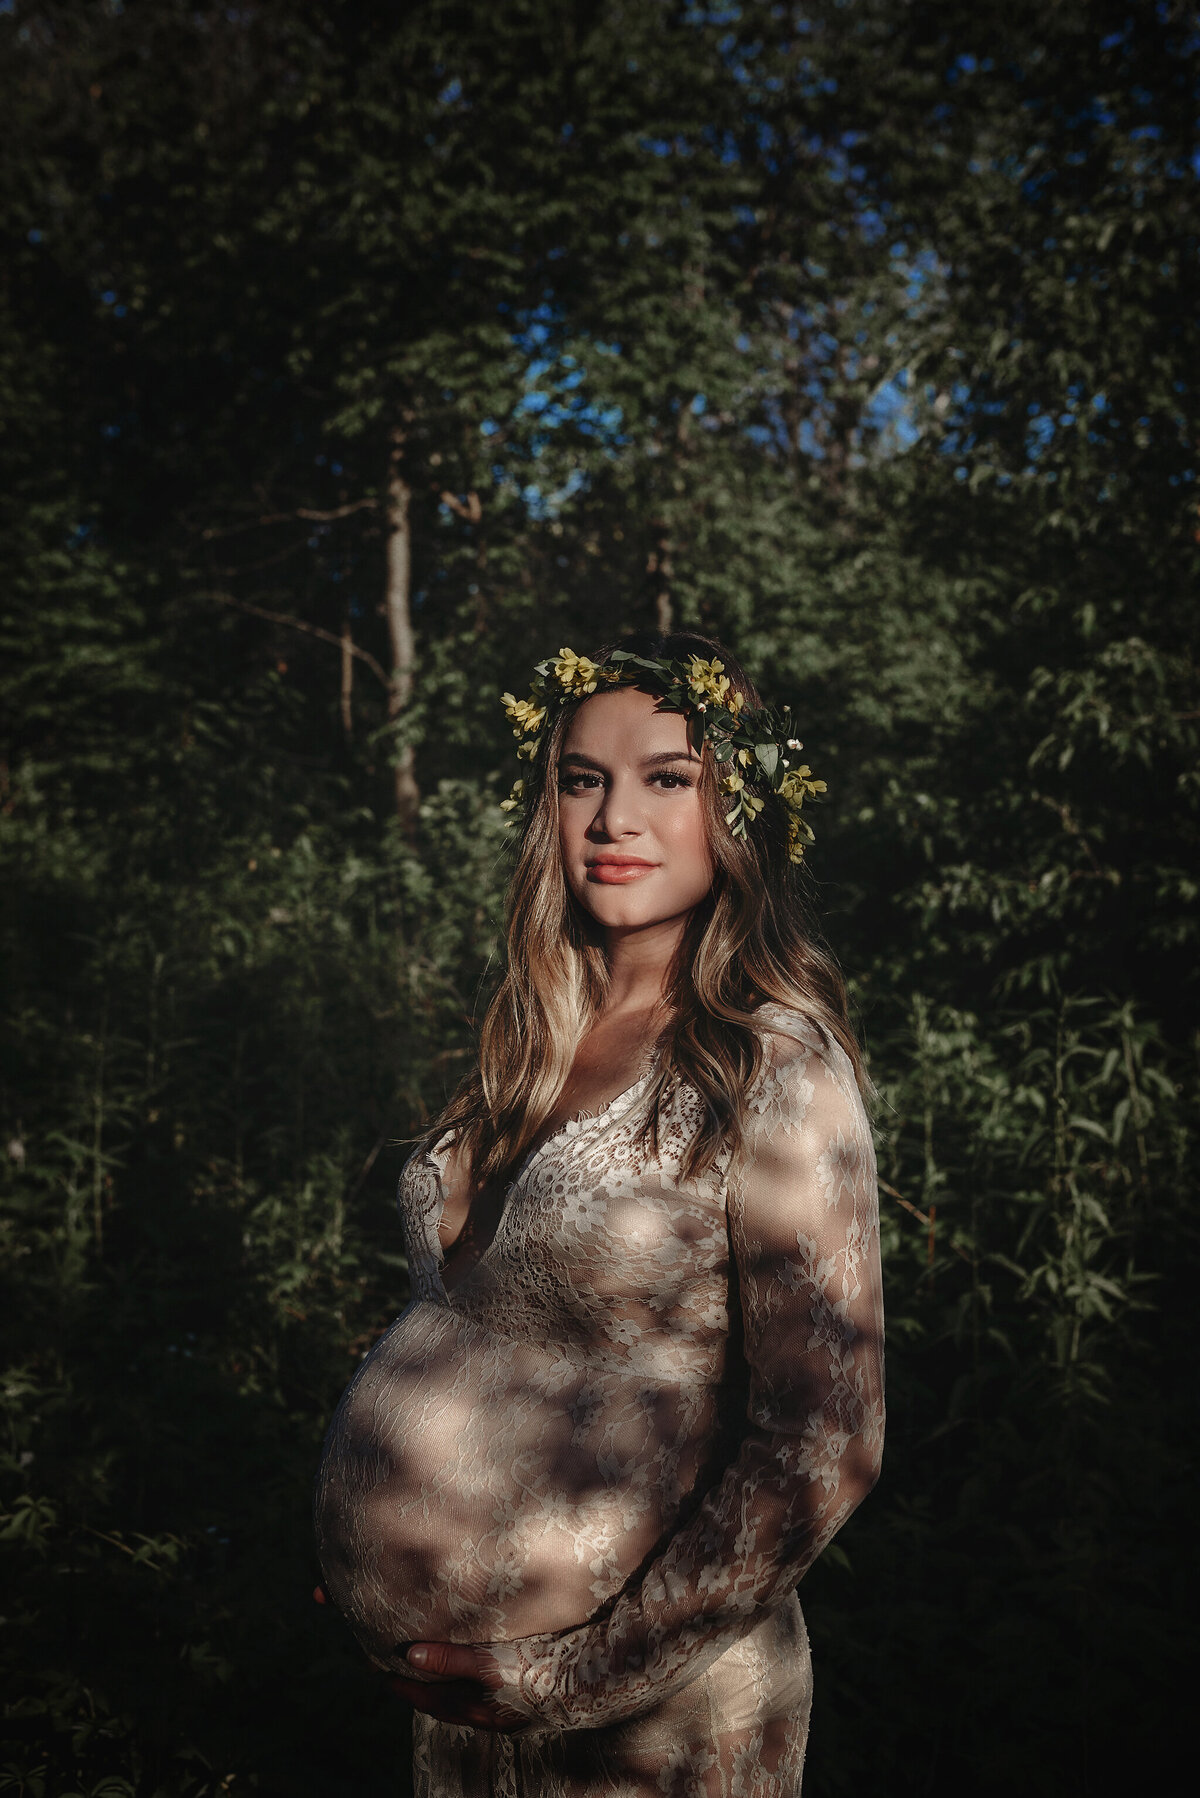 Step into ethereal expectations with maternity portraits in Minneapolis by Shannon Kathleen. Let every frame tell the story of your magical journey into motherhood.